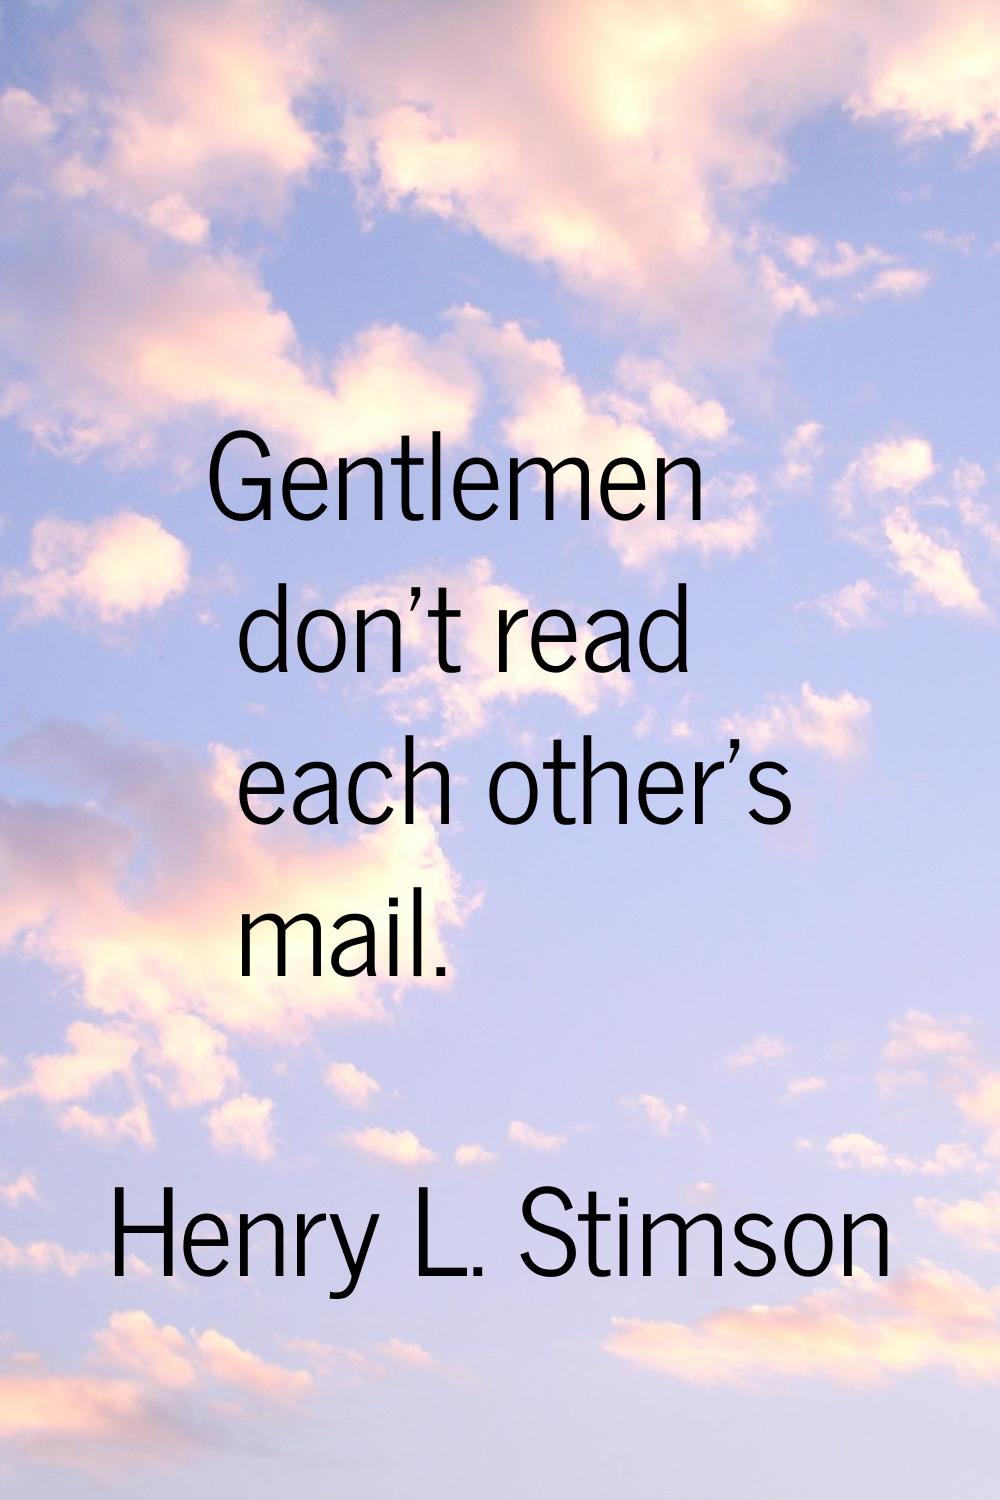 Gentlemen don't read each other's mail.